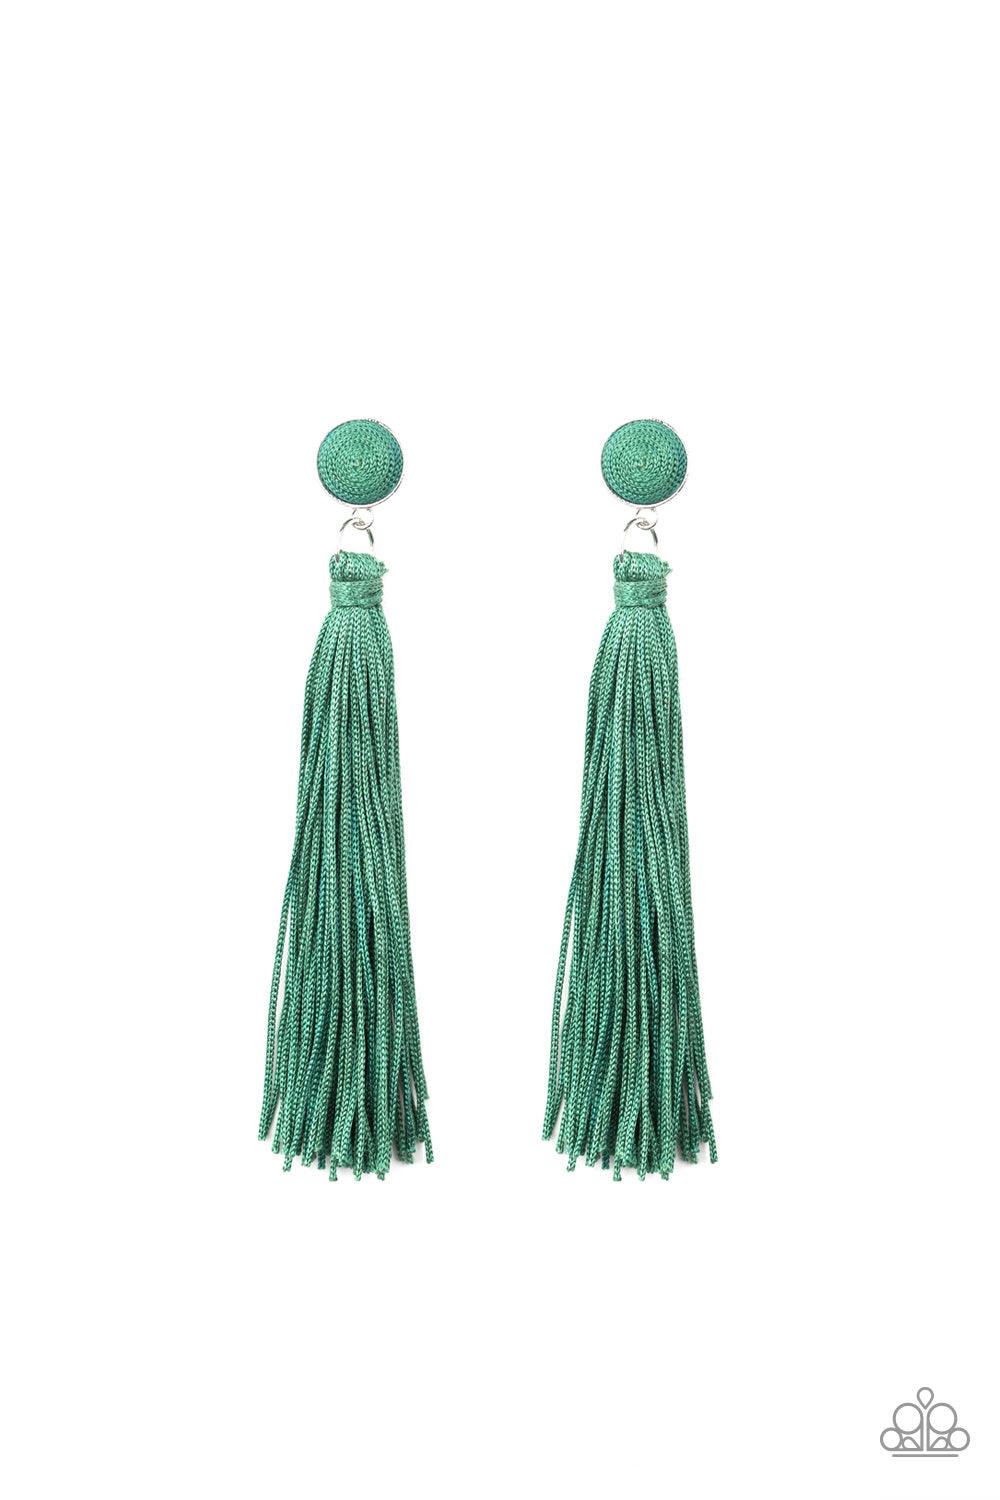 Paparazzi Accessories Tightrope Tassel - Green A tassel of shiny green cording swings from the bottom of a matching green threaded button-top frame for a flirtatious fashion. Earring attaches to a standard post fitting. Jewelry